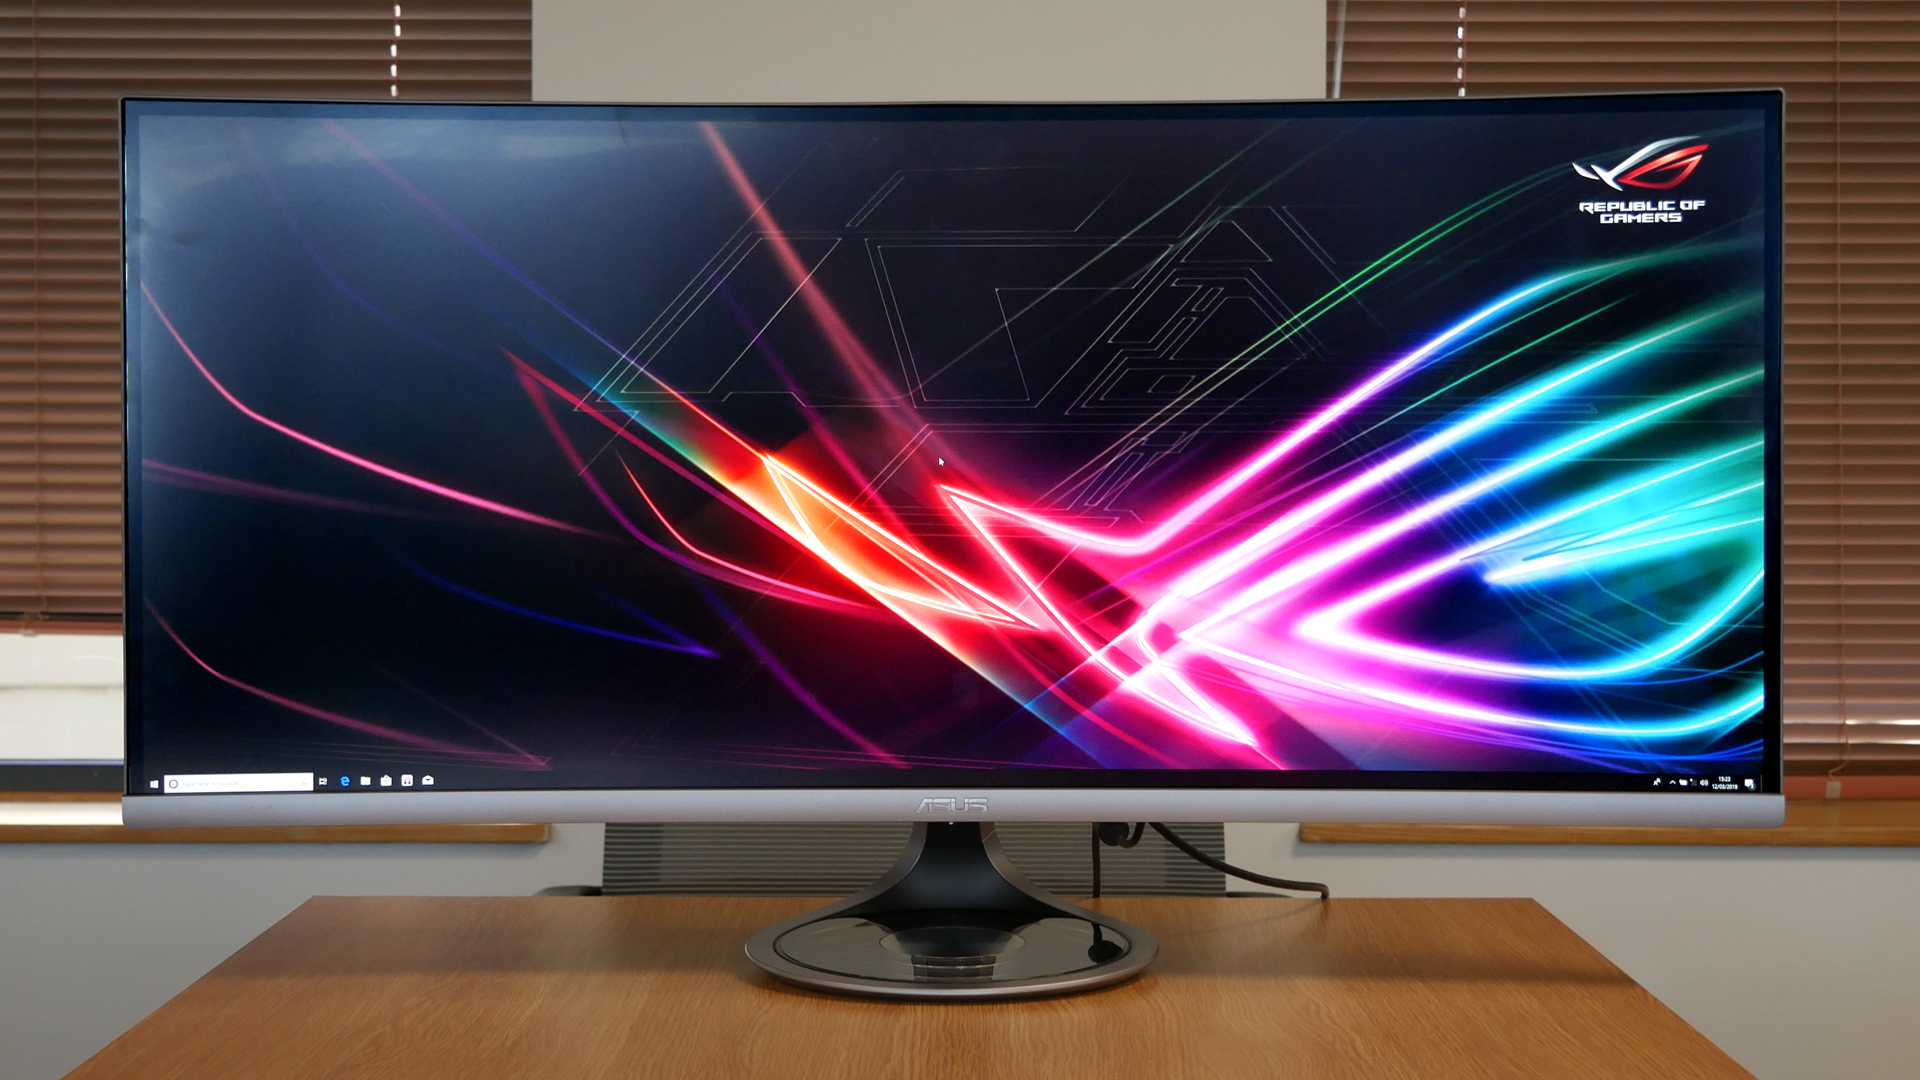 Asus Designo Curve MX38VC from the front on a wooden desk in front of two windows